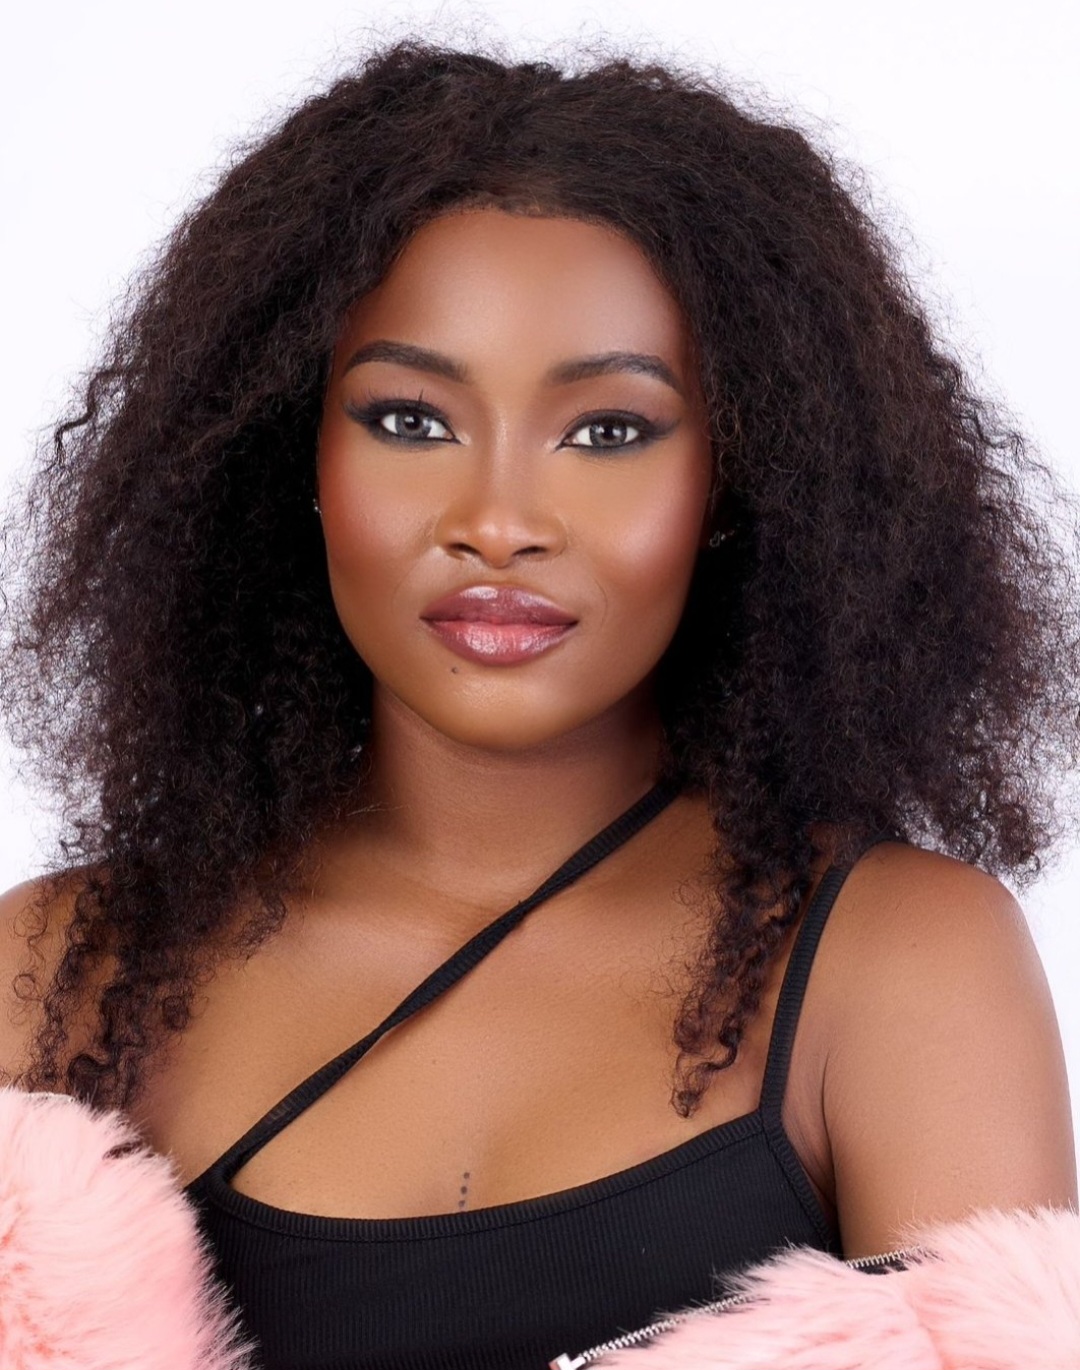 Ilebaye called out for providing her account number so fans can send her money despite winning N120 million; she responds